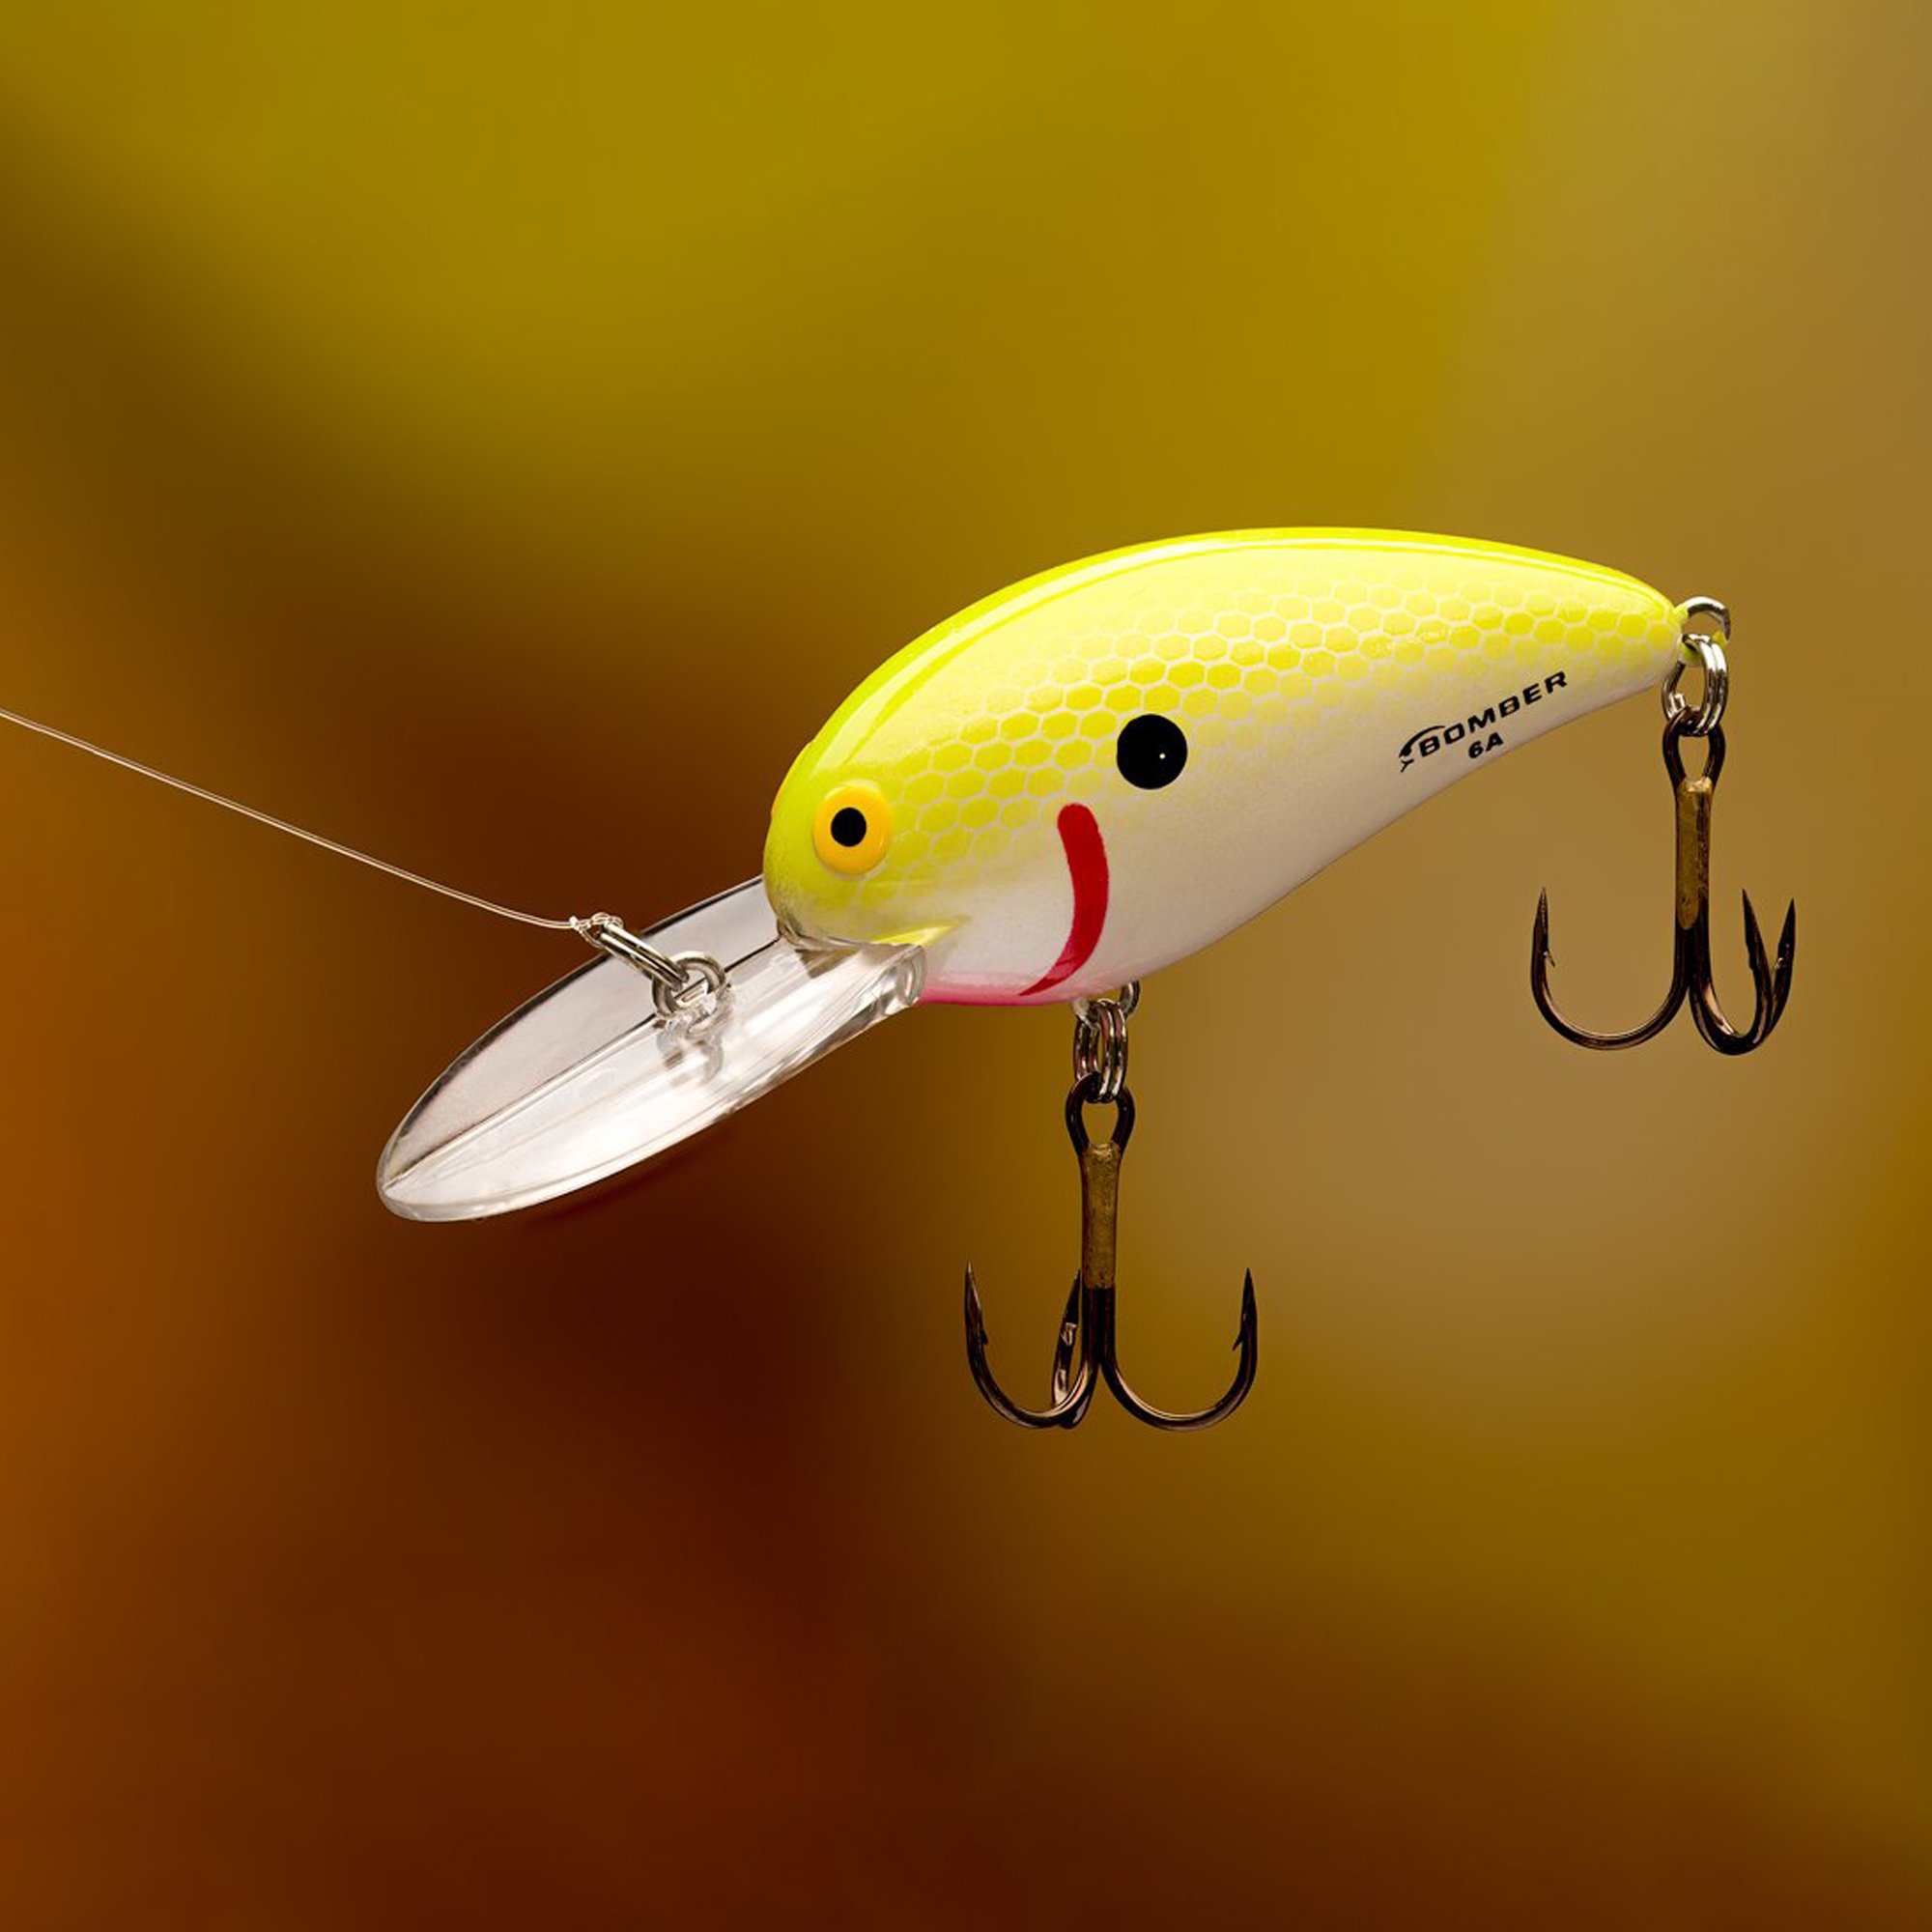  Sport fishing lures need good closeup photography to show off the details 